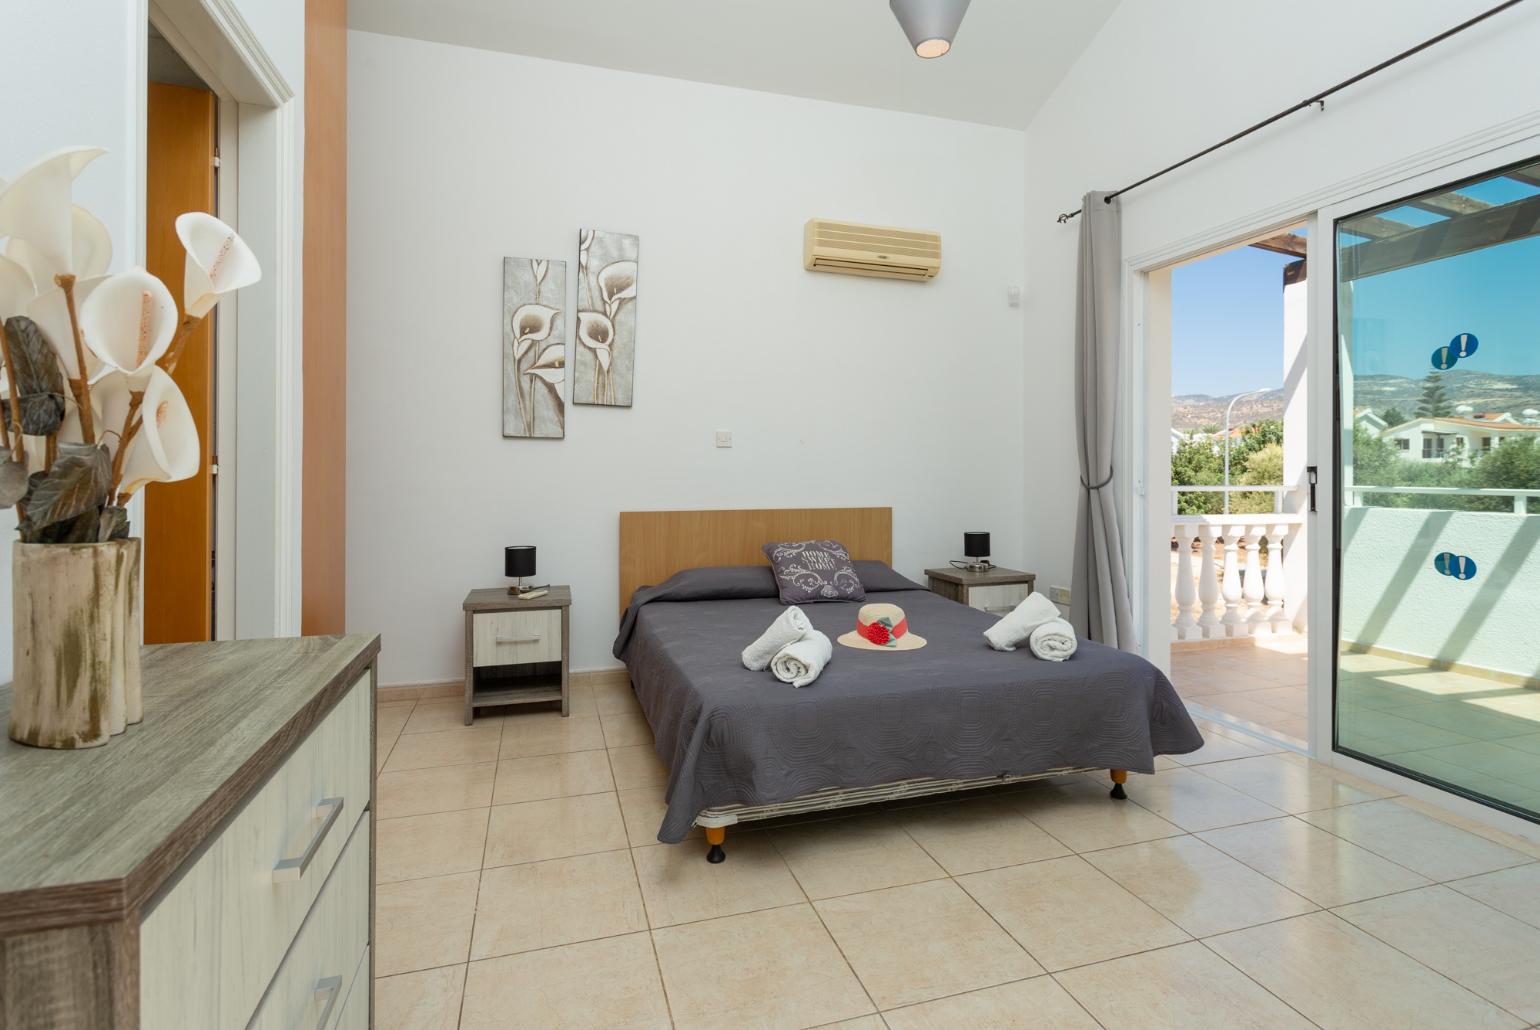 Double bedroom with en suite bathroom, A/C, and upper terrace access